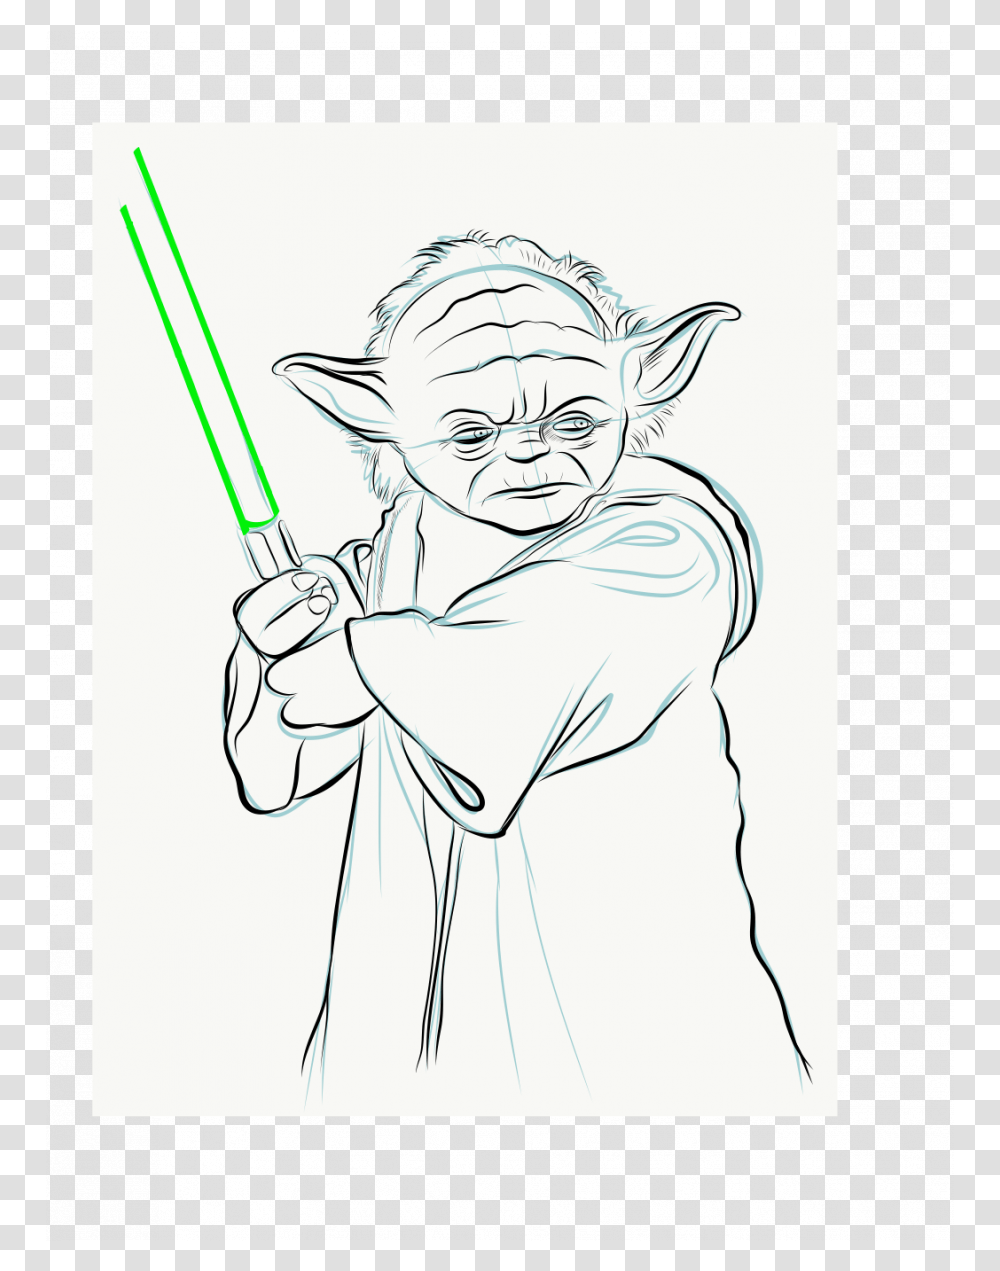 How To Draw A Cute Yoda From Star Wars Realistic Drawing Drawing Person Human Sketch Transparent Png Pngset Com